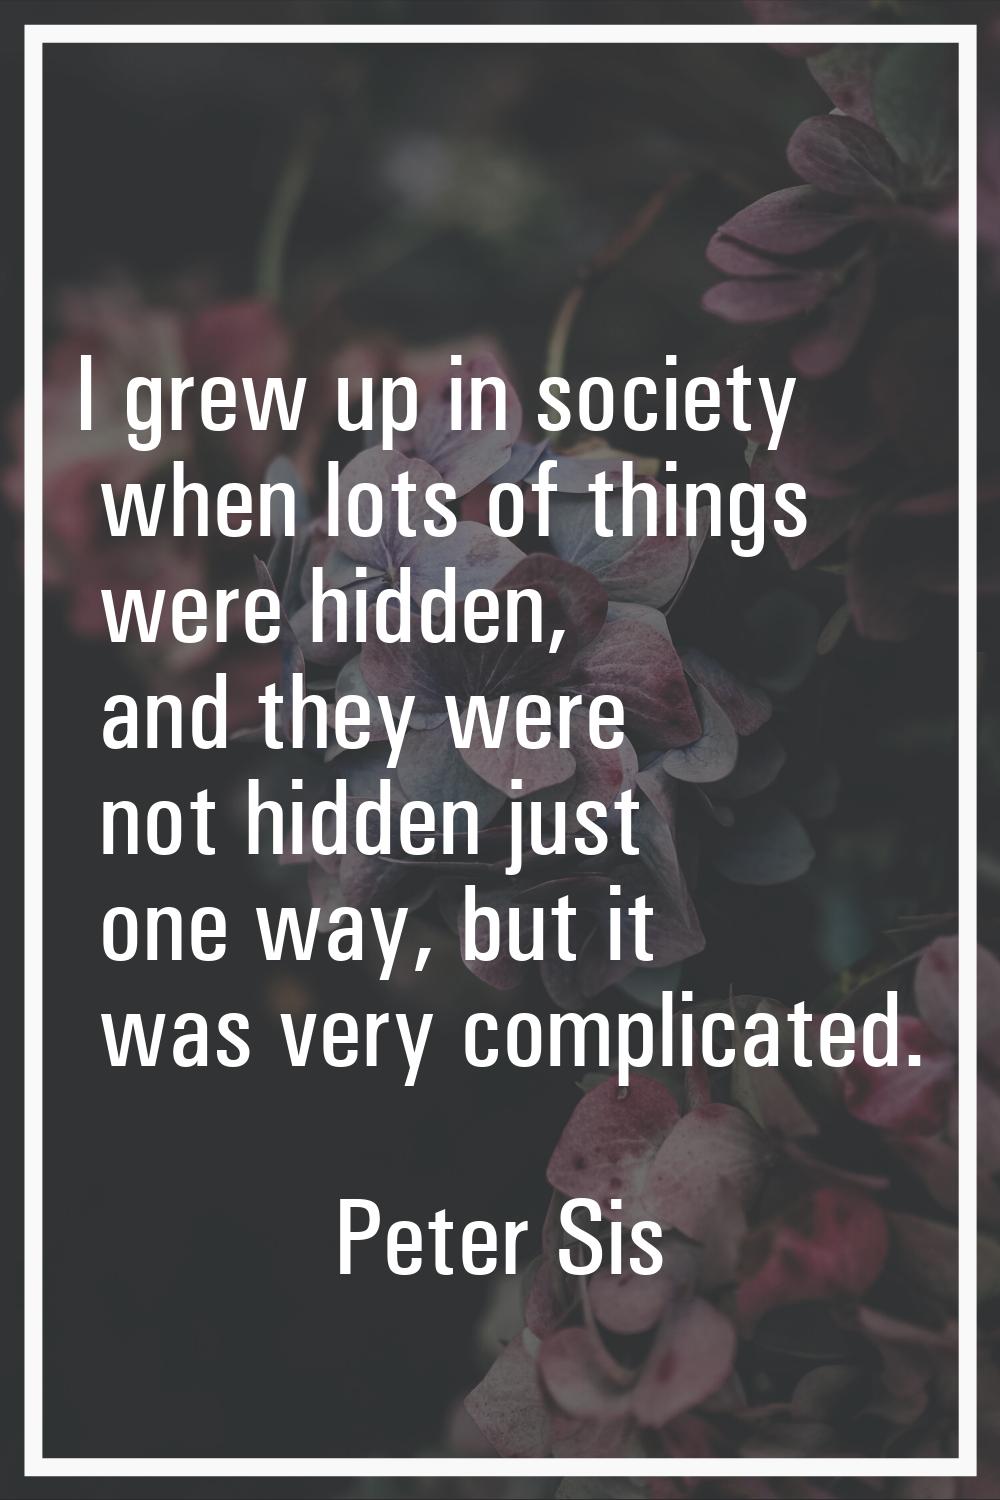 I grew up in society when lots of things were hidden, and they were not hidden just one way, but it